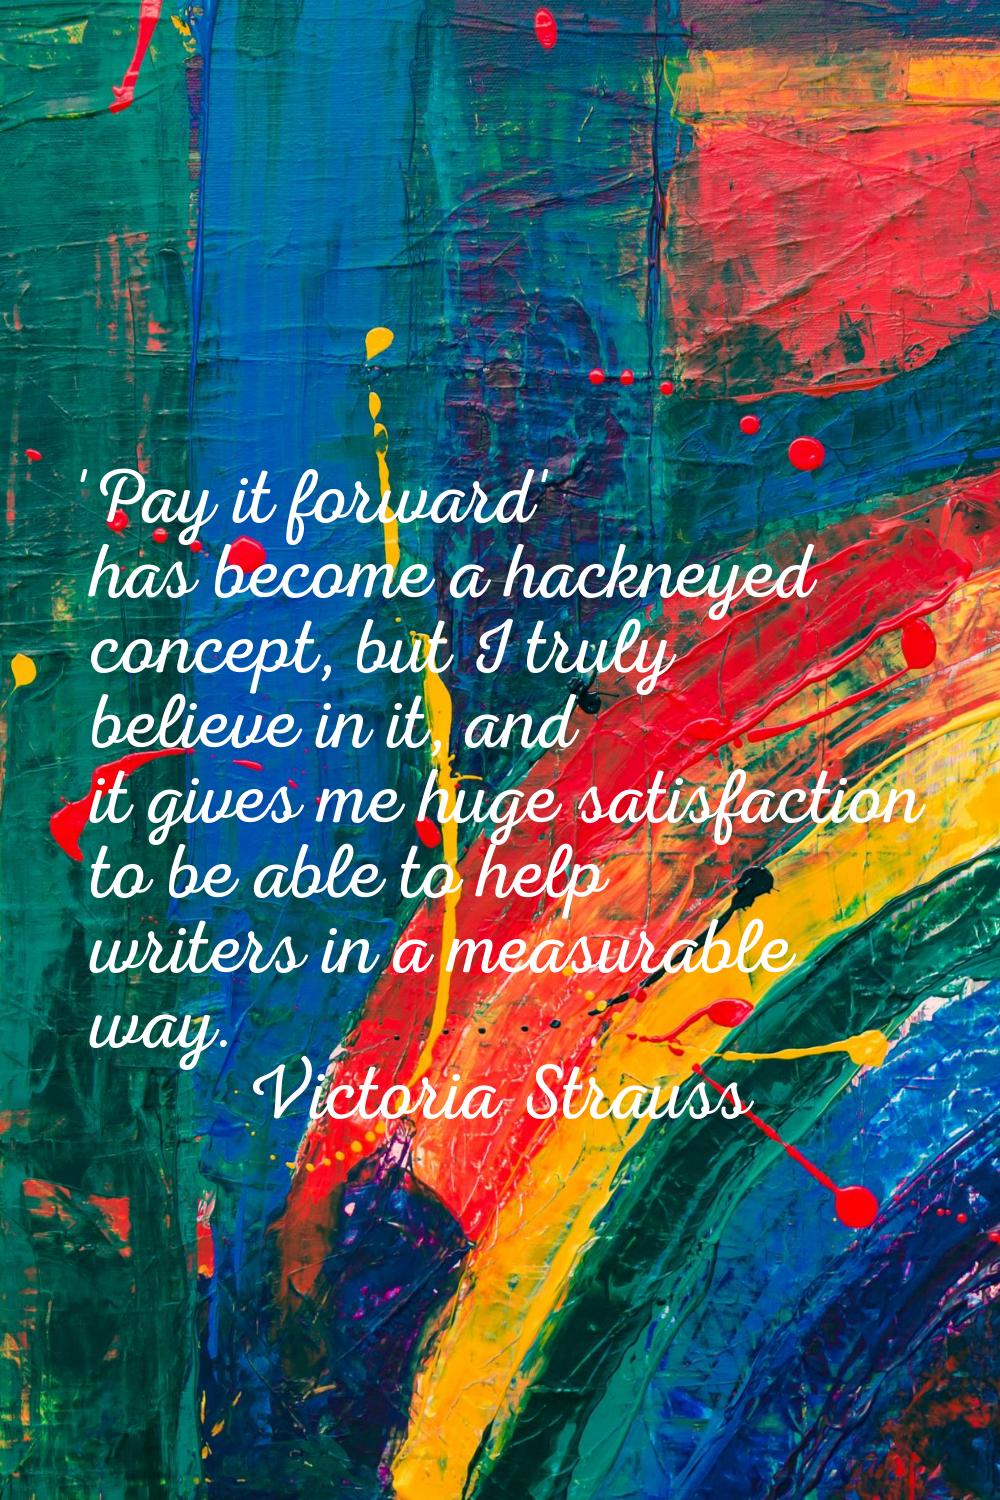 'Pay it forward' has become a hackneyed concept, but I truly believe in it, and it gives me huge sa